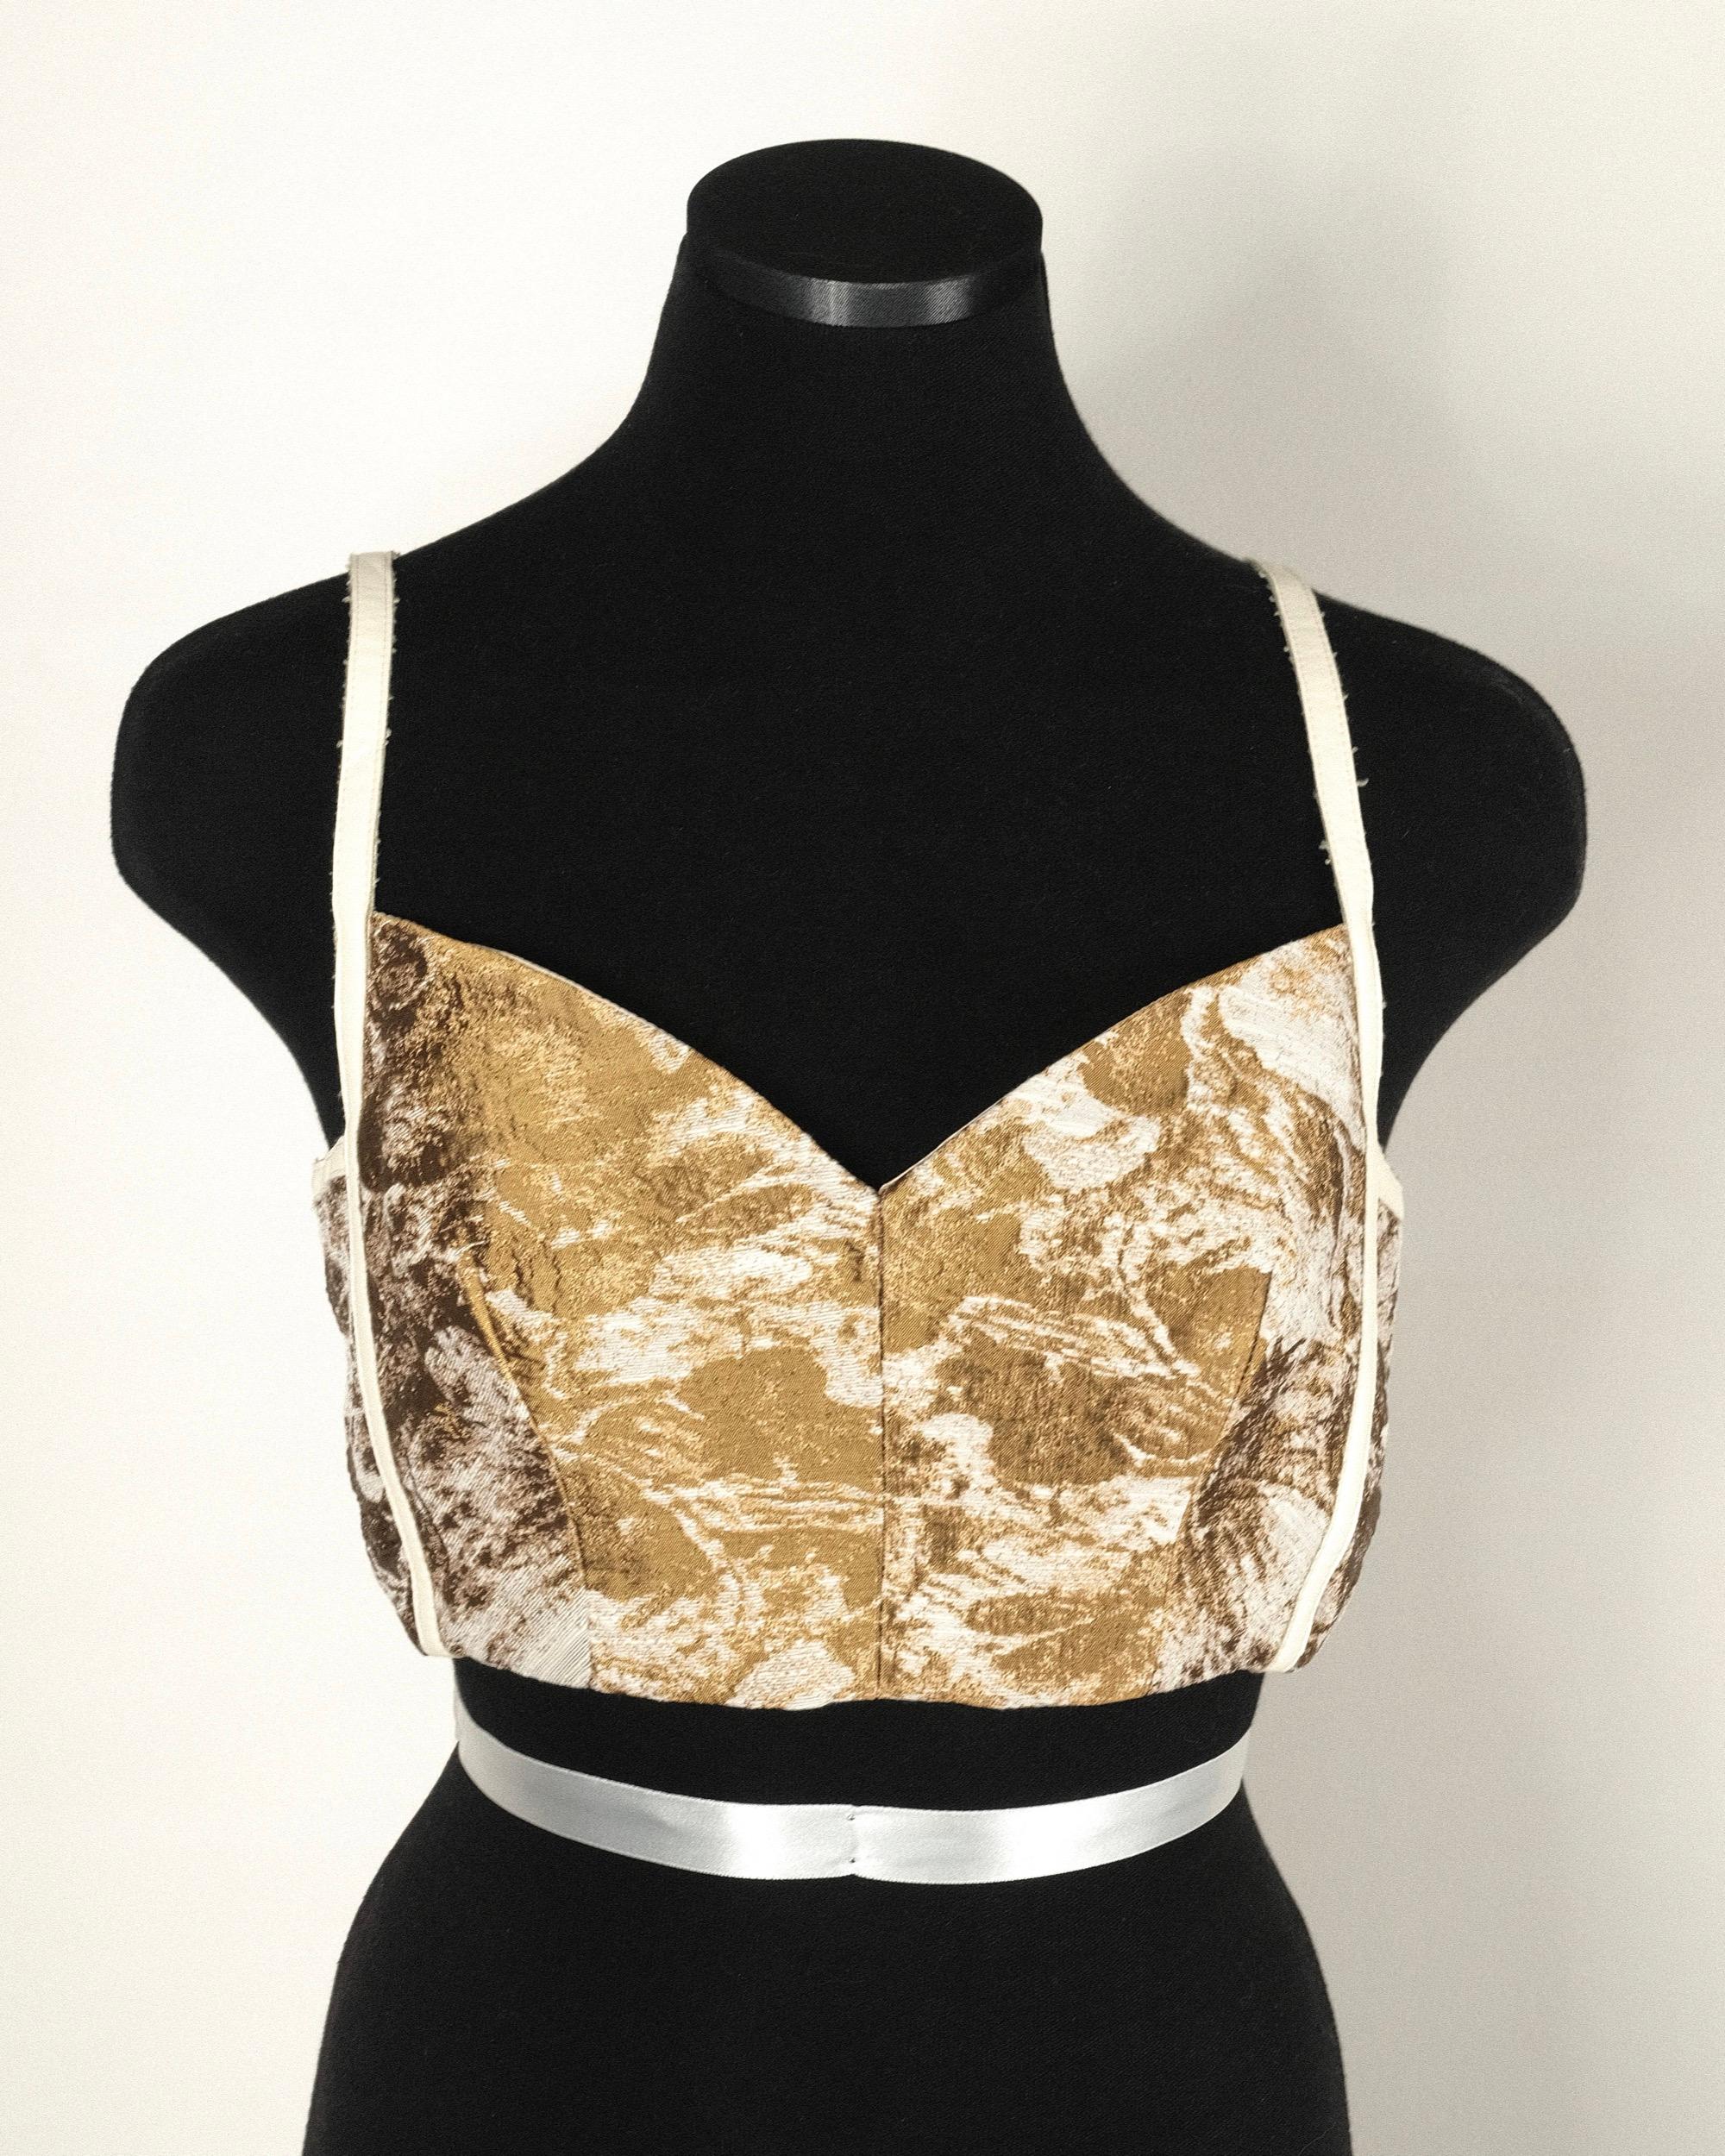 Jacket and Bustier Set from Contemporary Italian Designer Erika Cavallini
Floral Jacquard, Brocade, Carpet Coat-esq 
Tags still attached 
Both items are rendred in Gold Floral Jacquard with leather detail
Bustier has raw leather spaghetti straps and